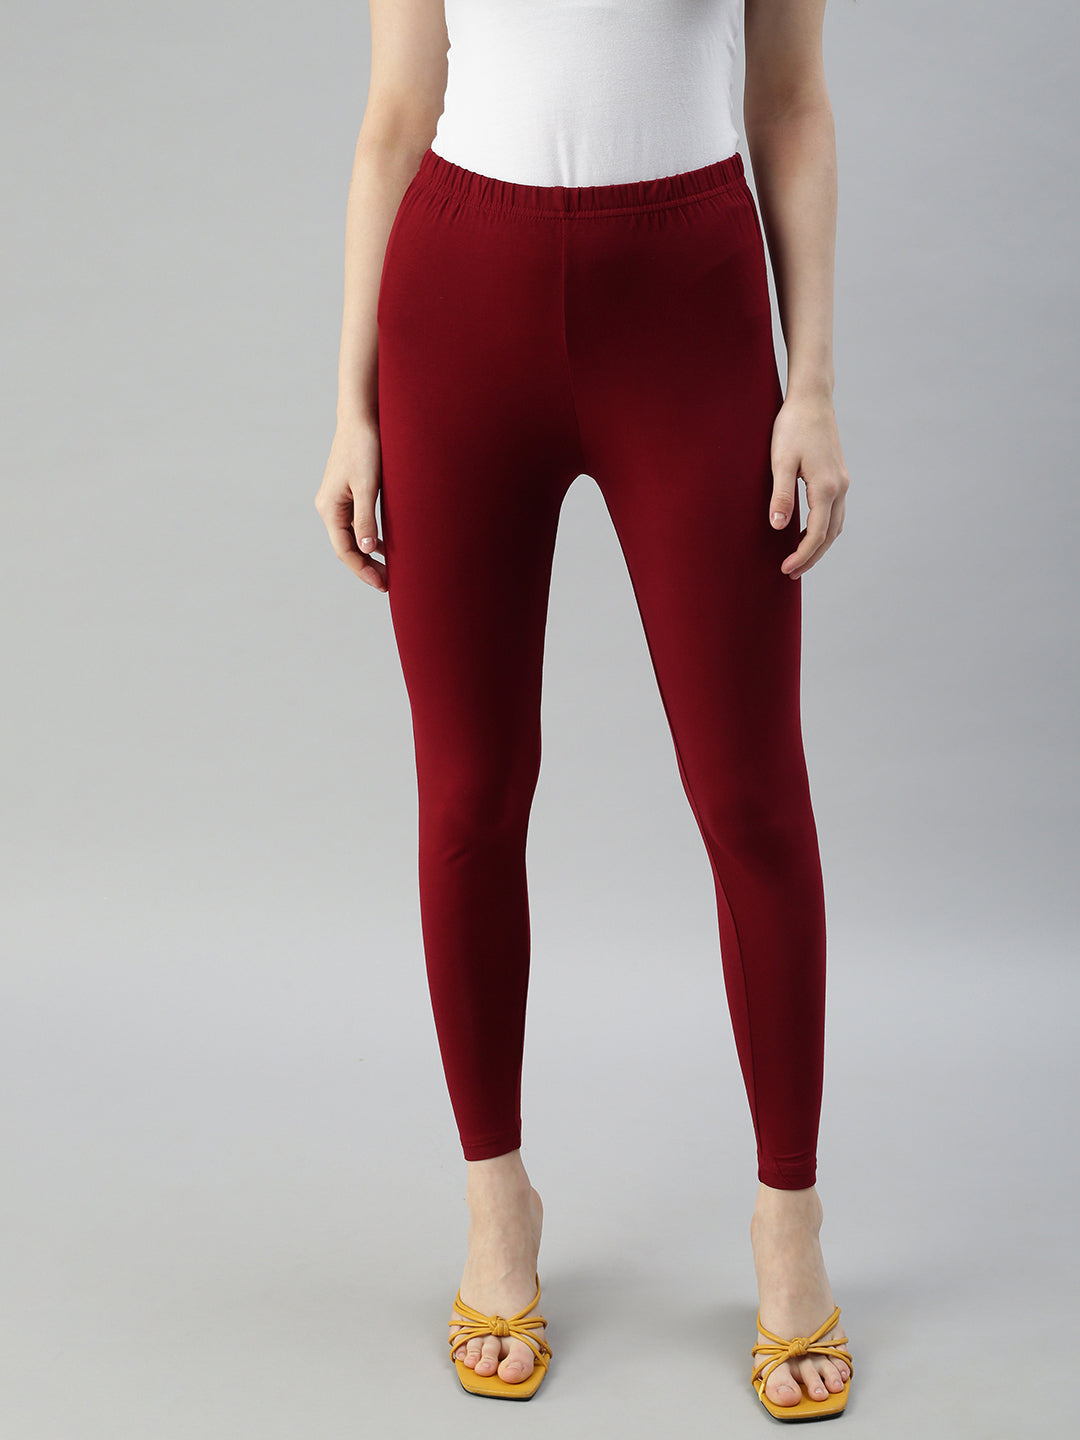 Jeggings Capri | Clothes, Leisure wear, Online shopping stores